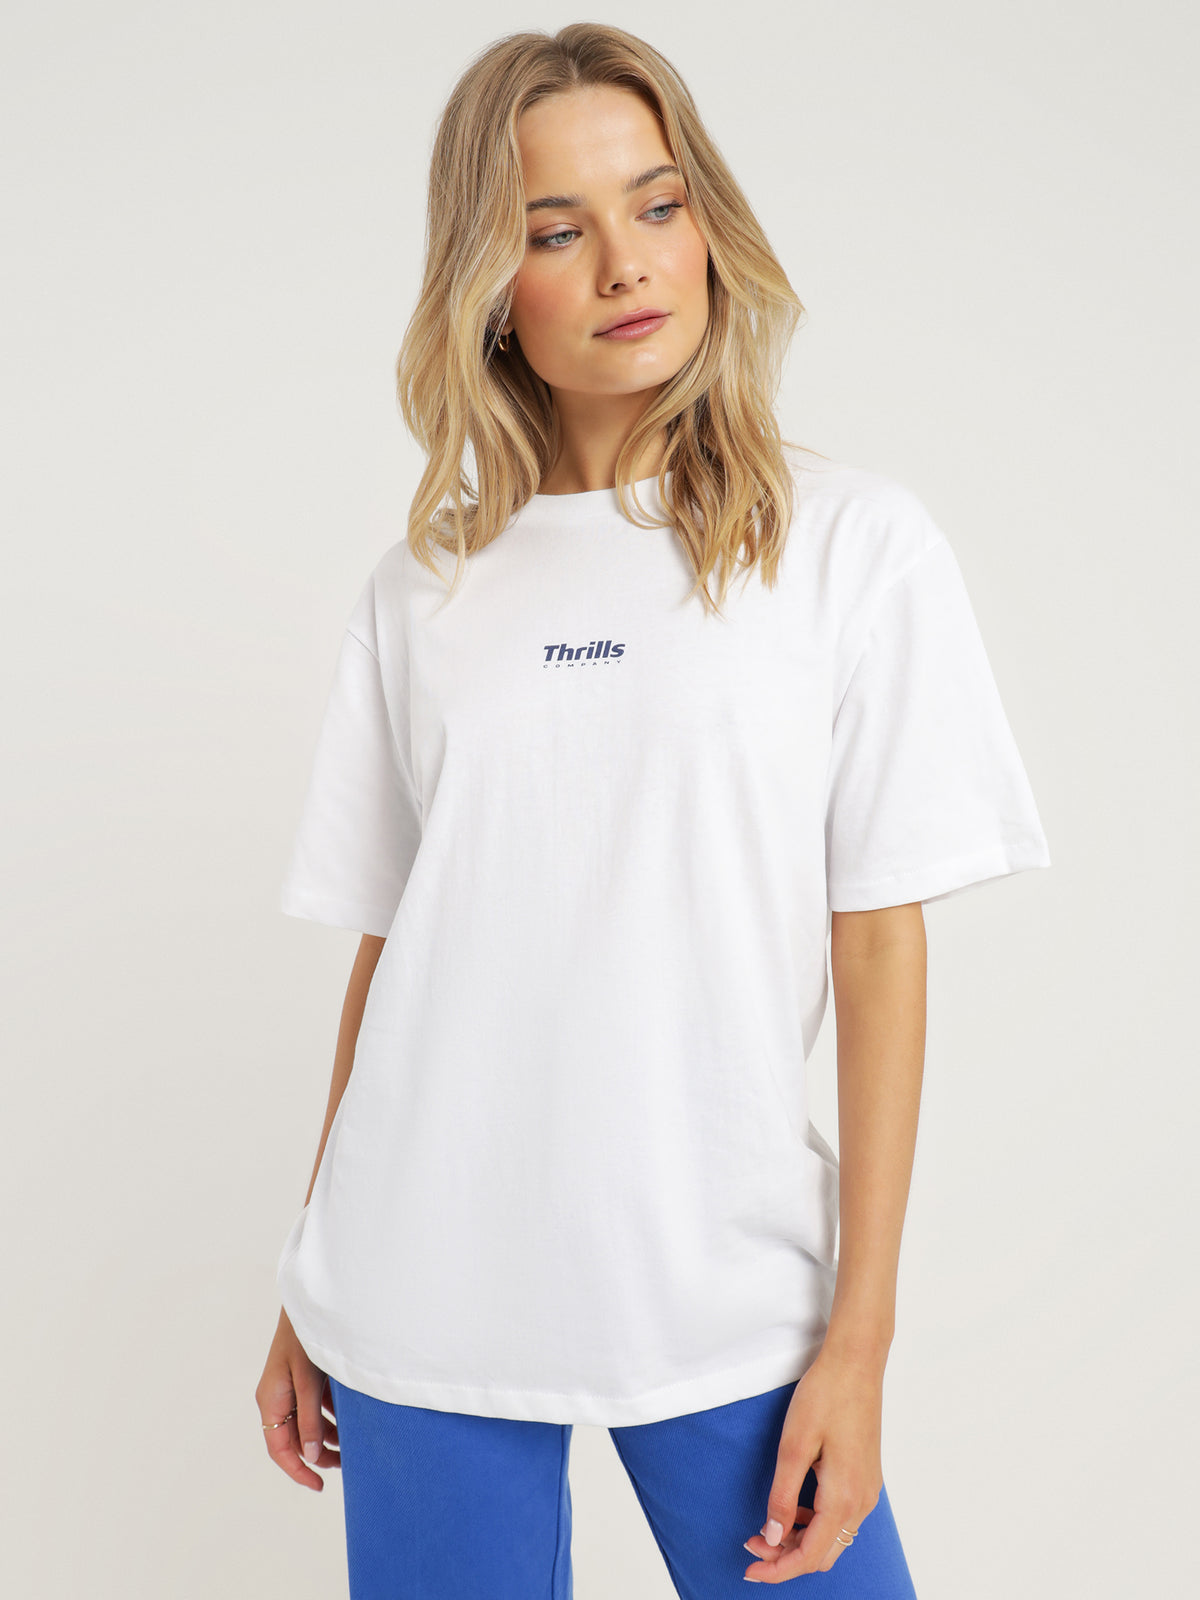 Paradox of Paradise Merch Fit T-Shirt in White